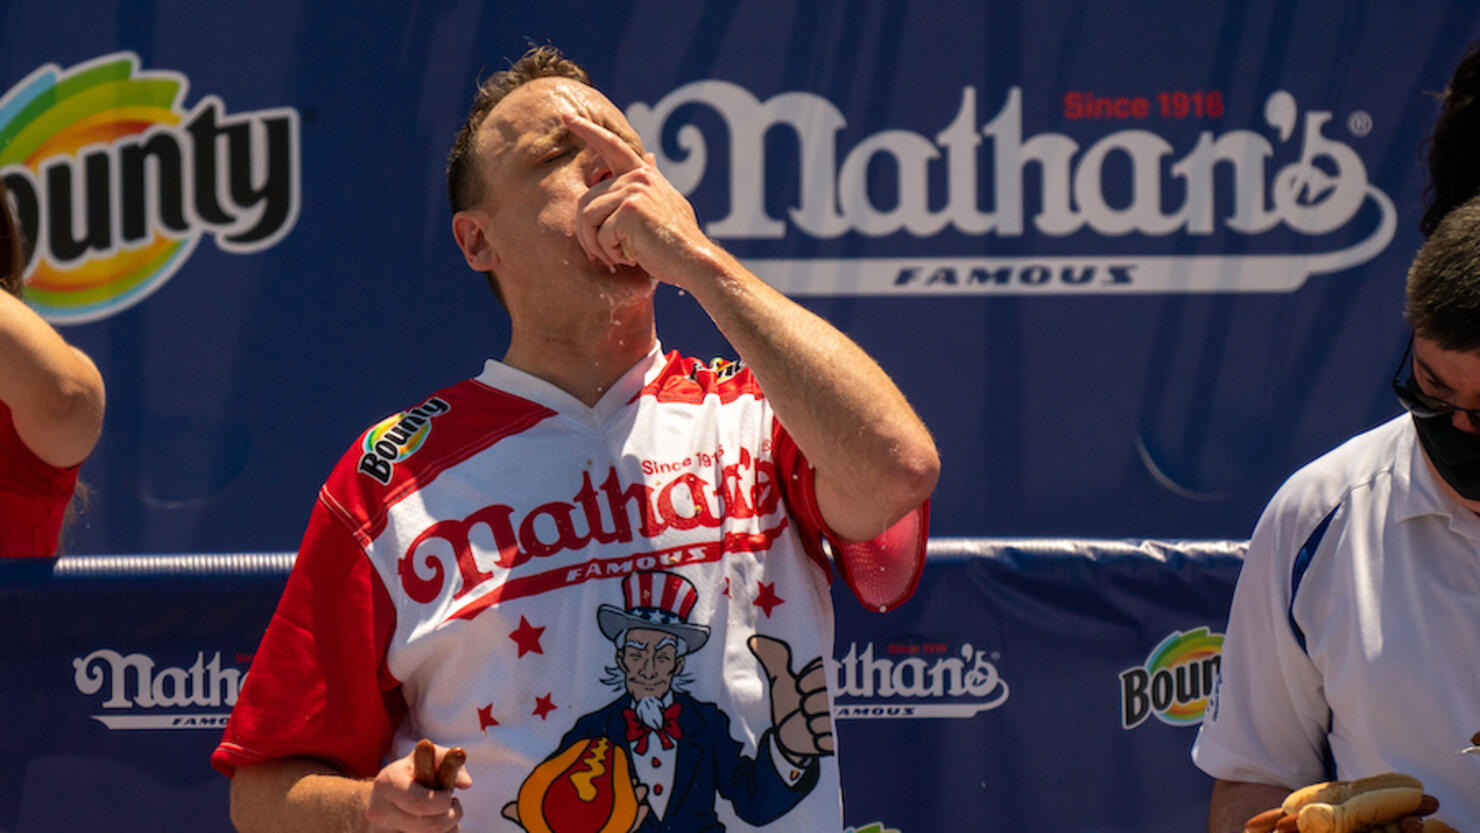 Nathan's Fourth of July Hot Dog-Eating Contest Returns To Coney Island